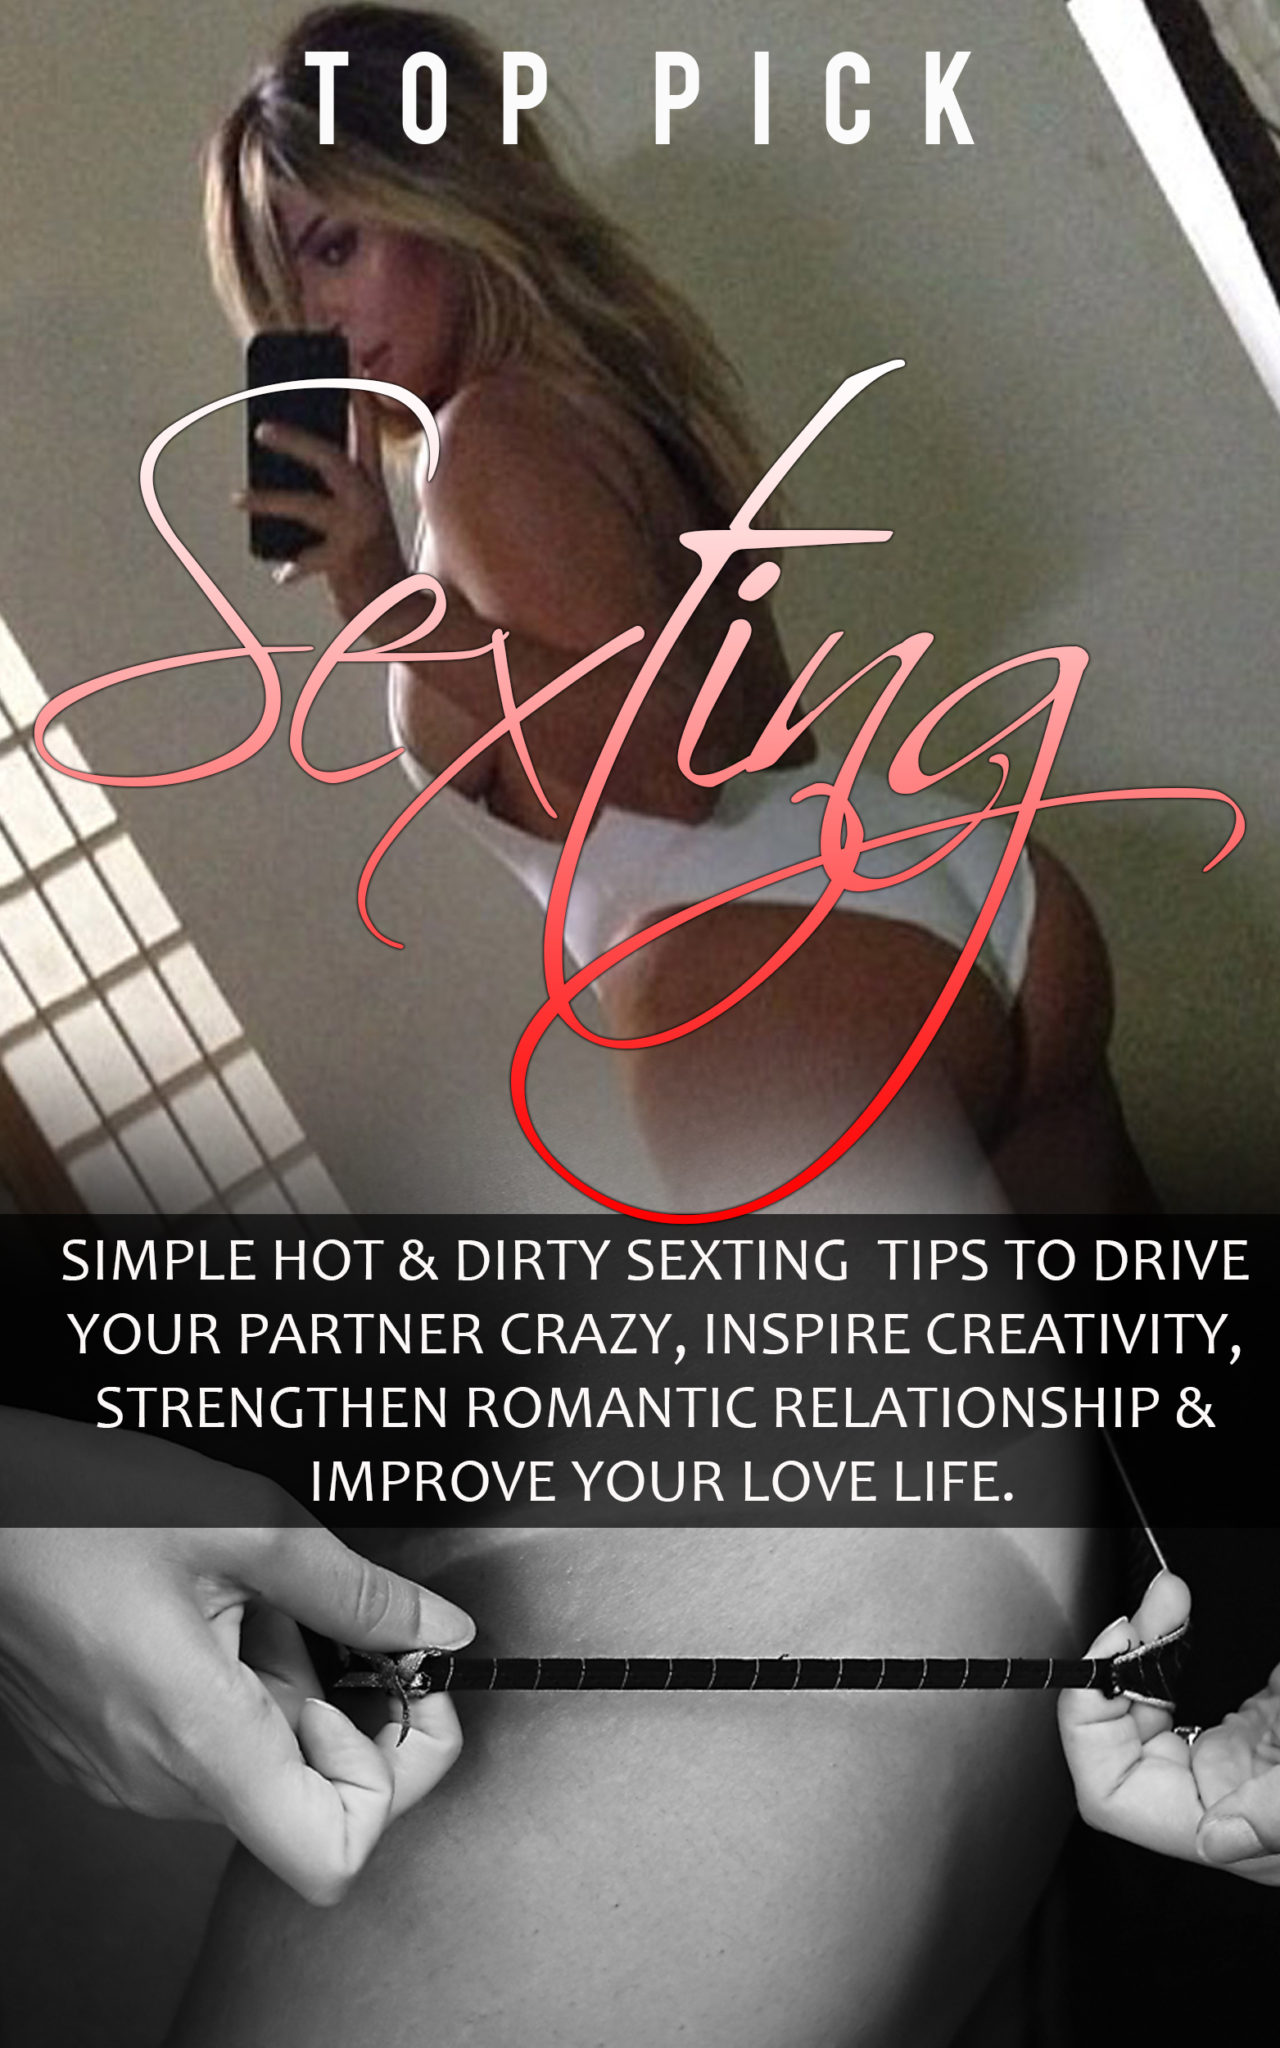 FREE: Sexting: Simple Hot & Dirty Sexting Tips to Drive Your Partner Crazy, Inspire Creativity, Strengthen Romantic Relationship & Improve Your Love Life (Dirty … For Men and Women, Sexting to Bette Sex) by Top Pick